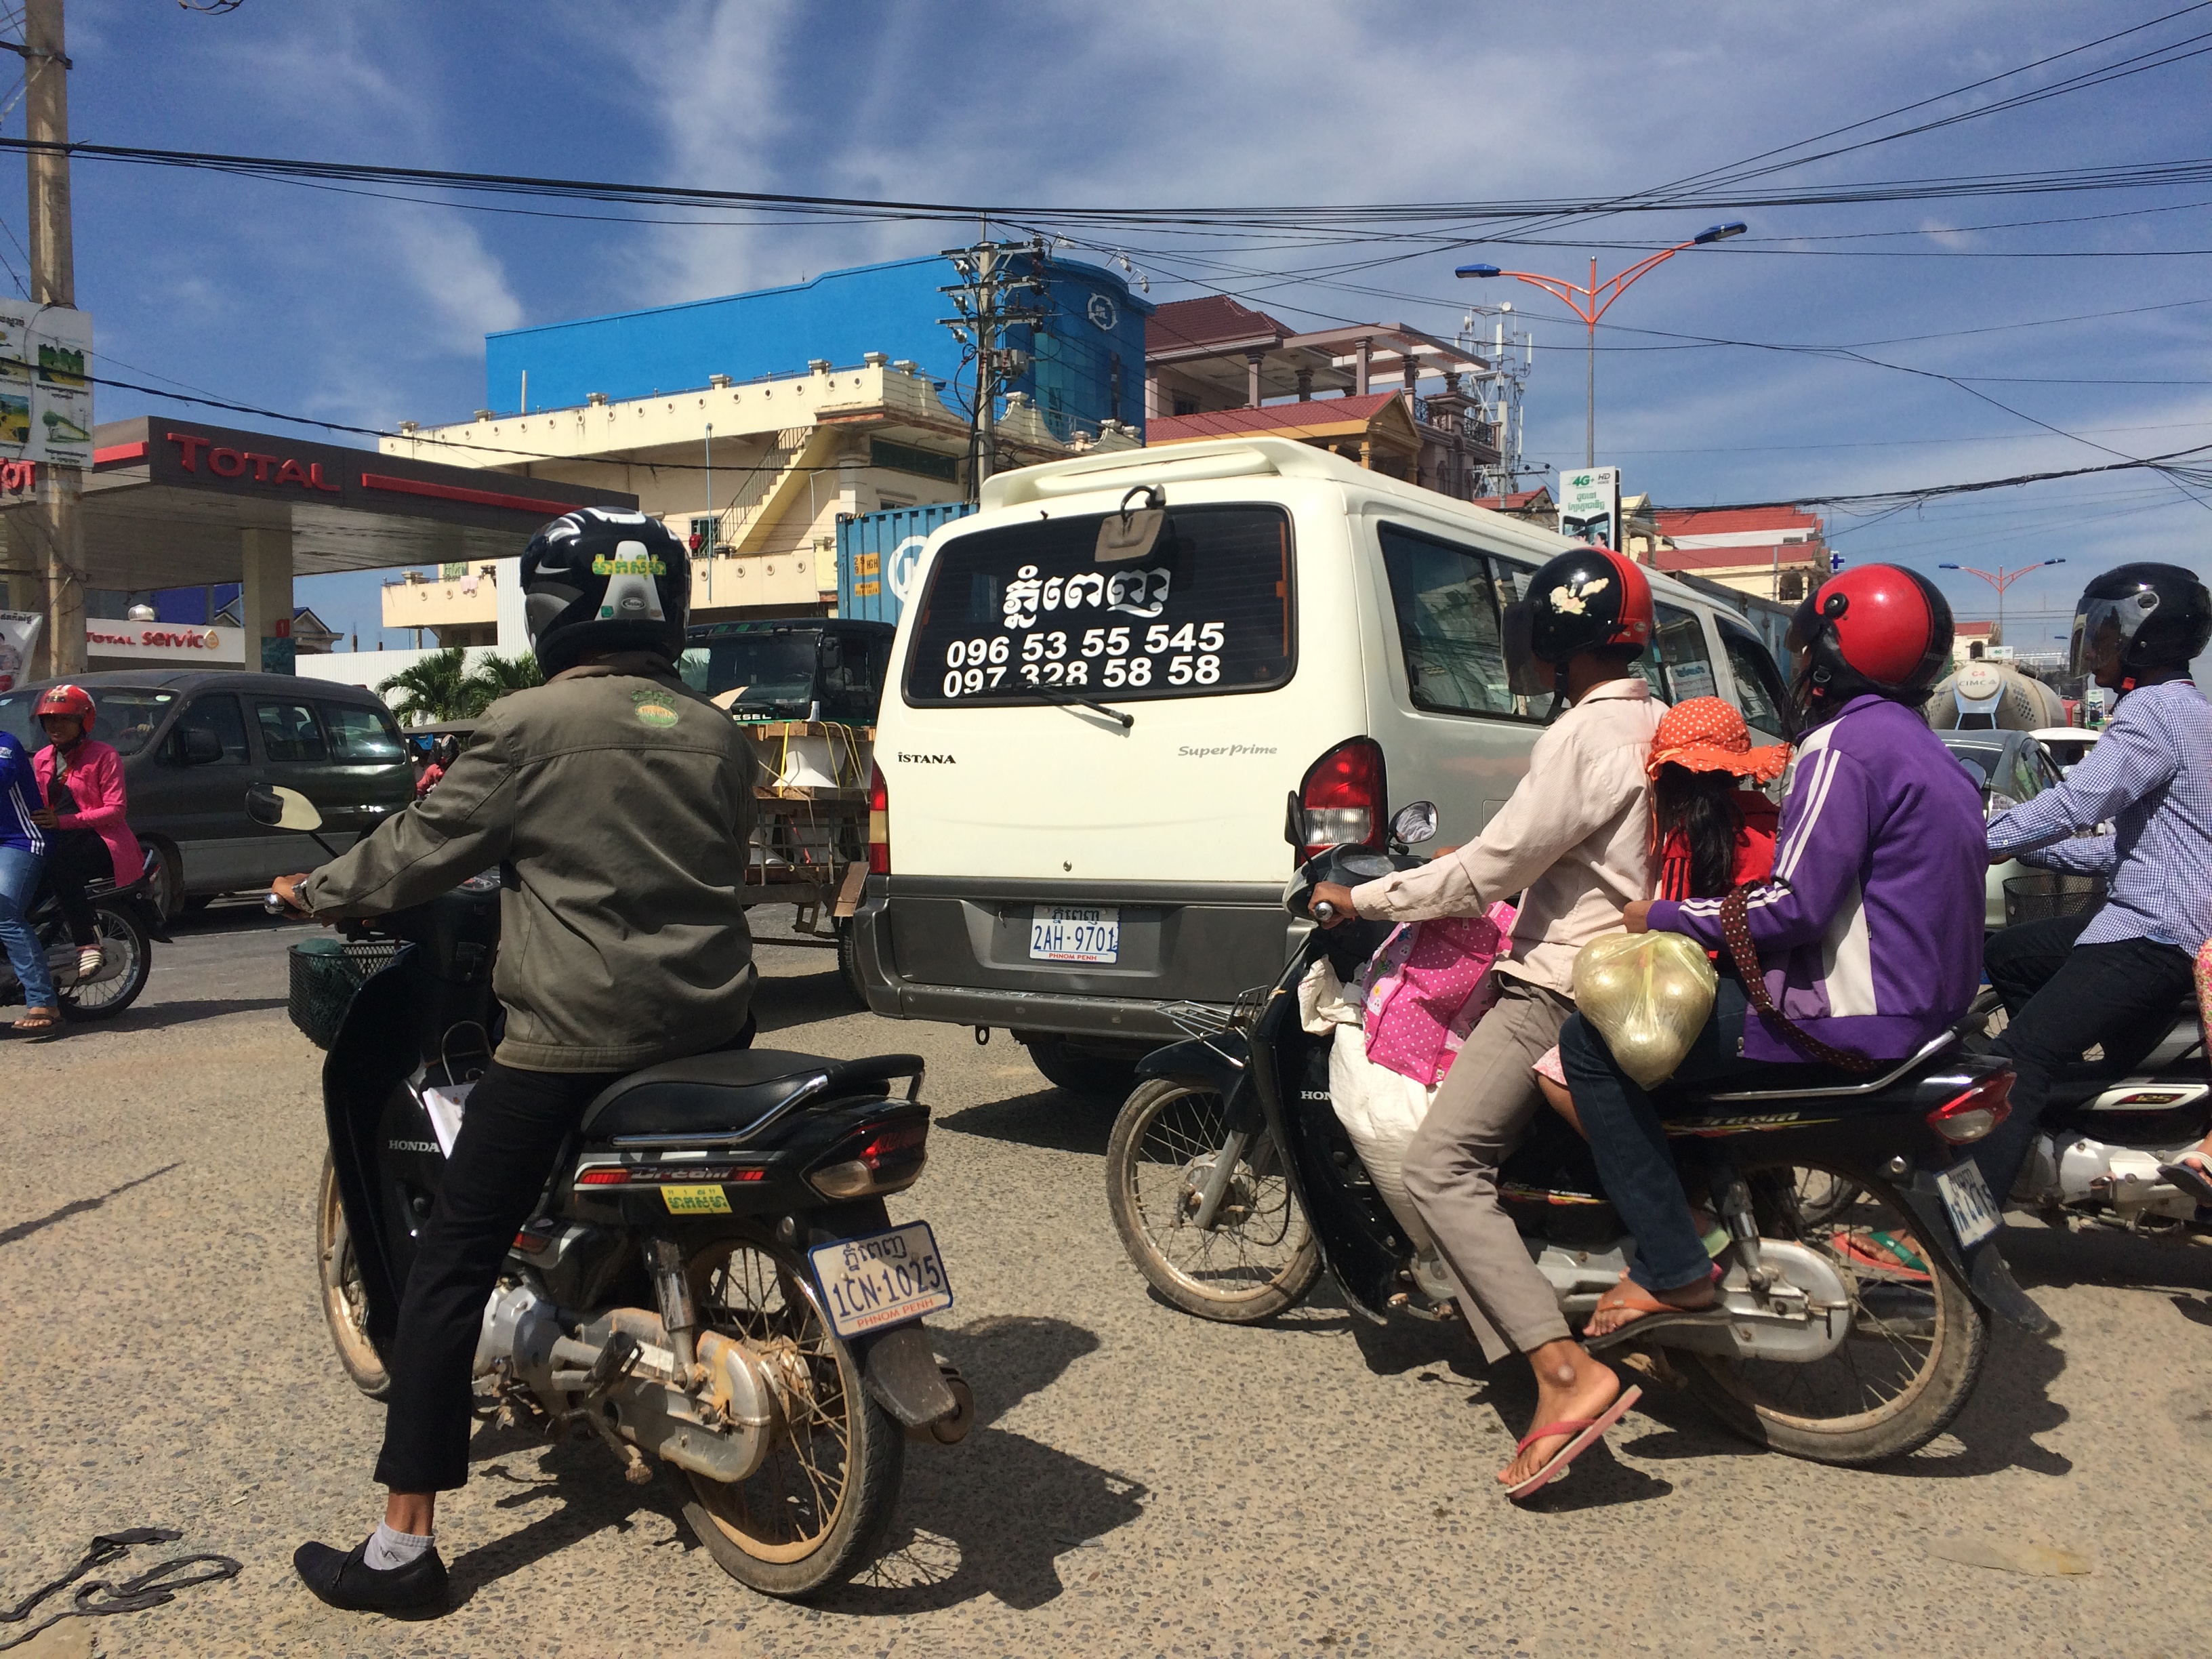 Busy street with cars and mopeds in Phnom Penh